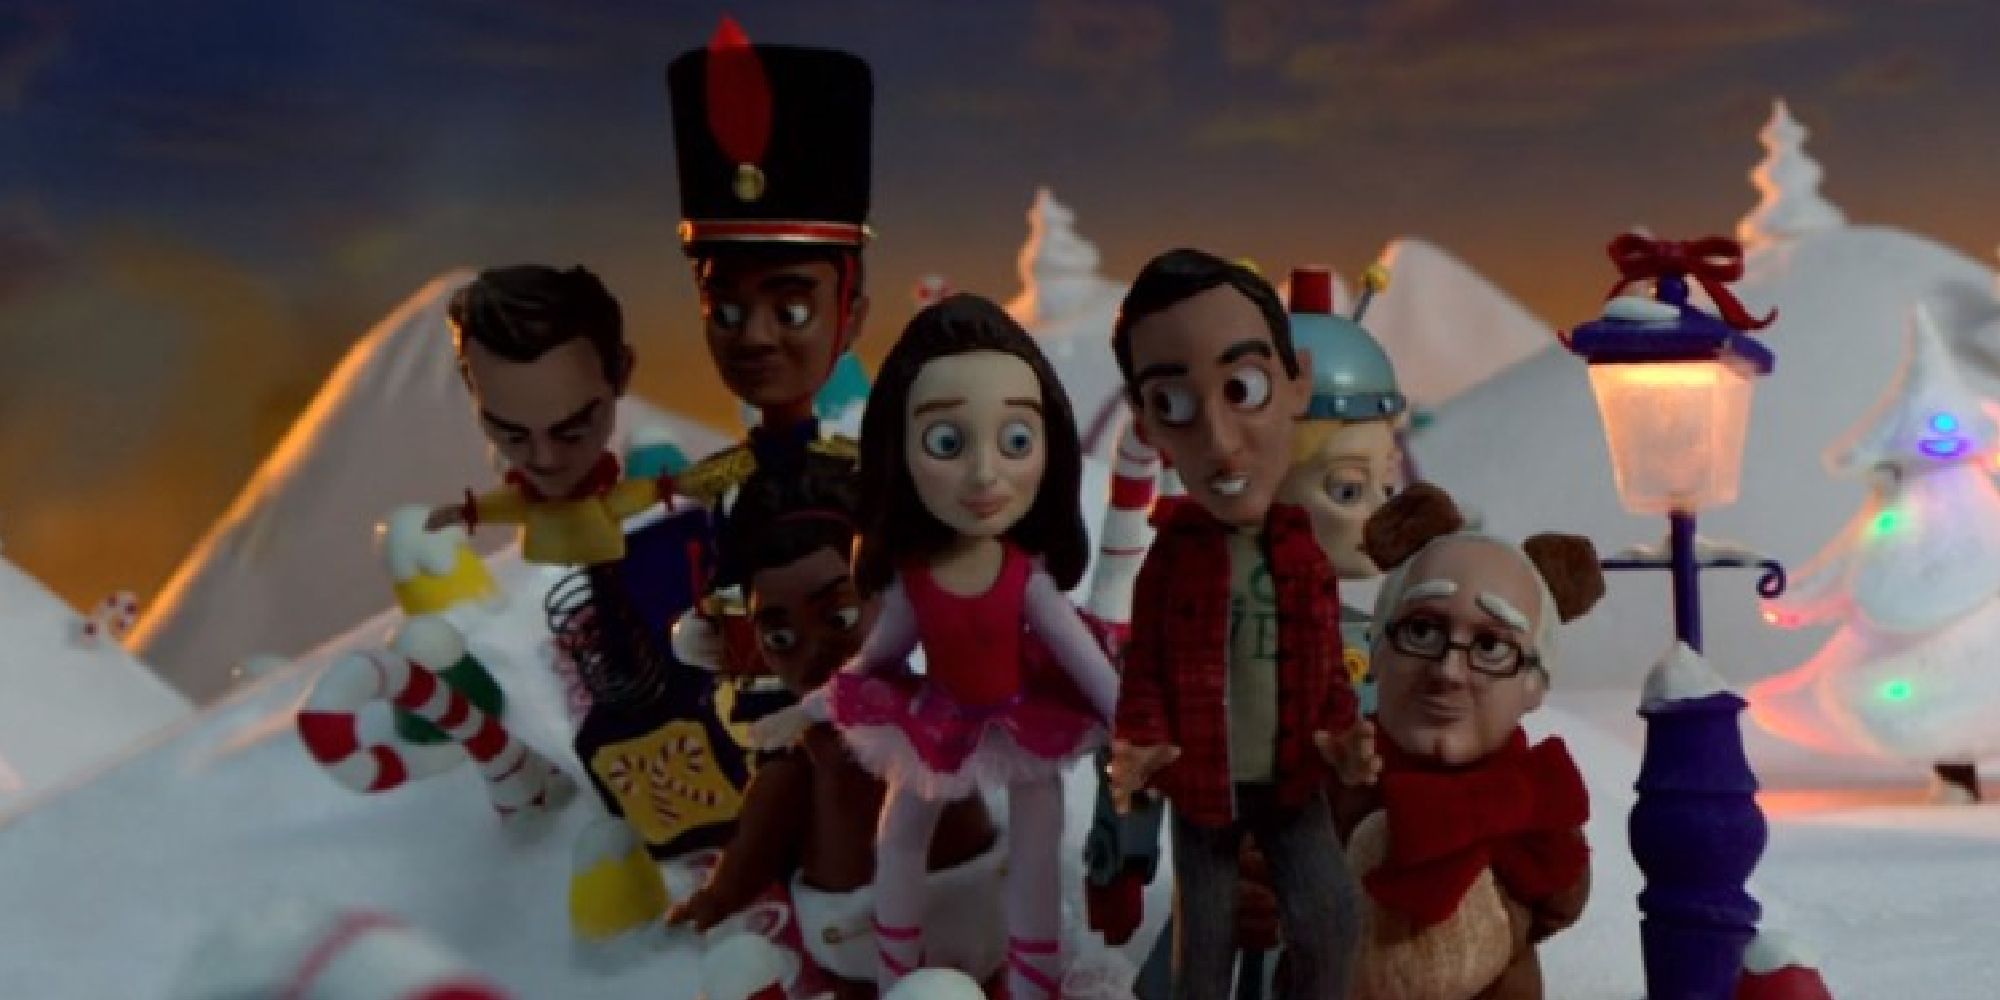 Jeff, Troy, Shirley, Annie, Britta, Abed, and Pierce walking in a clay-mation Christmas world